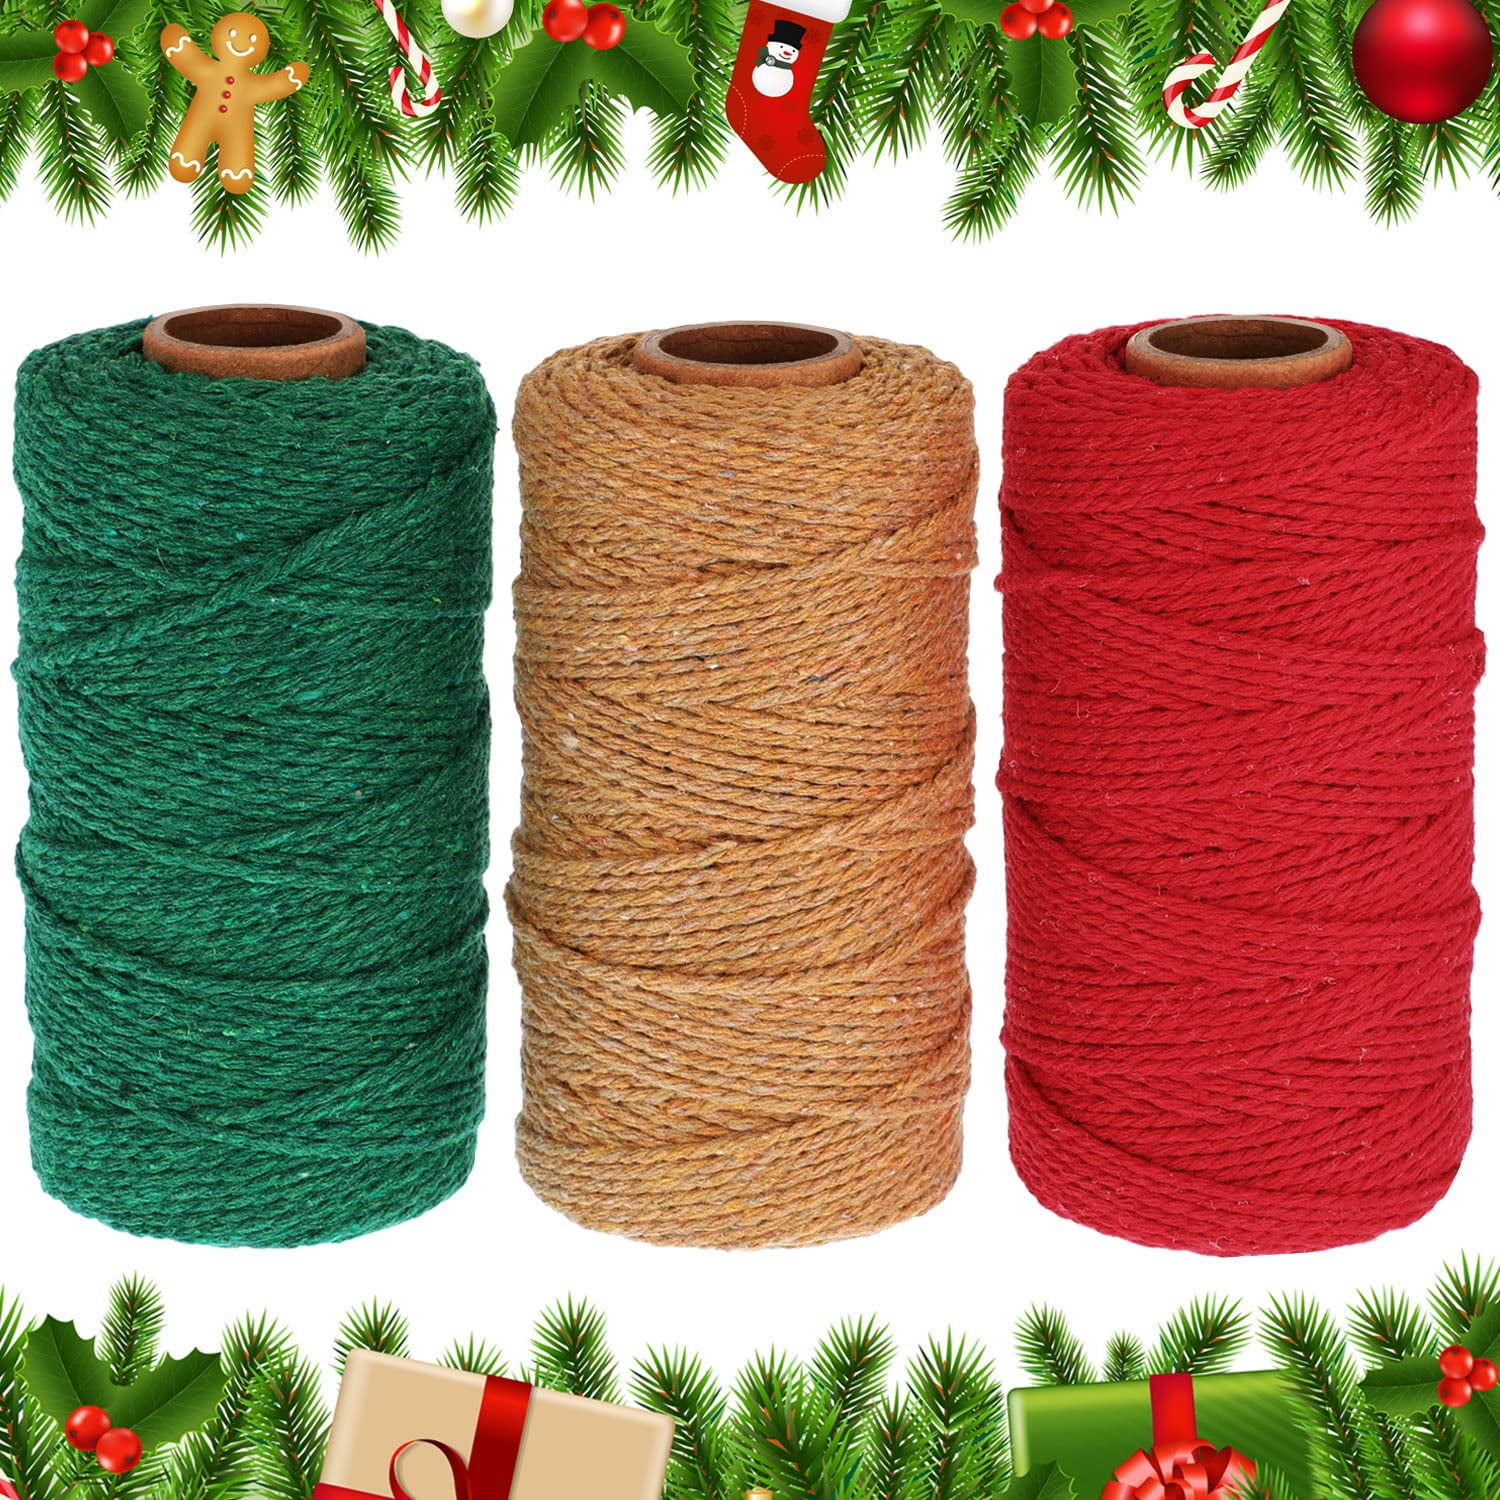 LEREATI Cotton Bakers Twine for Cooking 328 Feet Red and Green Twine String  2mm Colored Christmas Twine for Gift Wrapping, Baking, Butchers, DIY